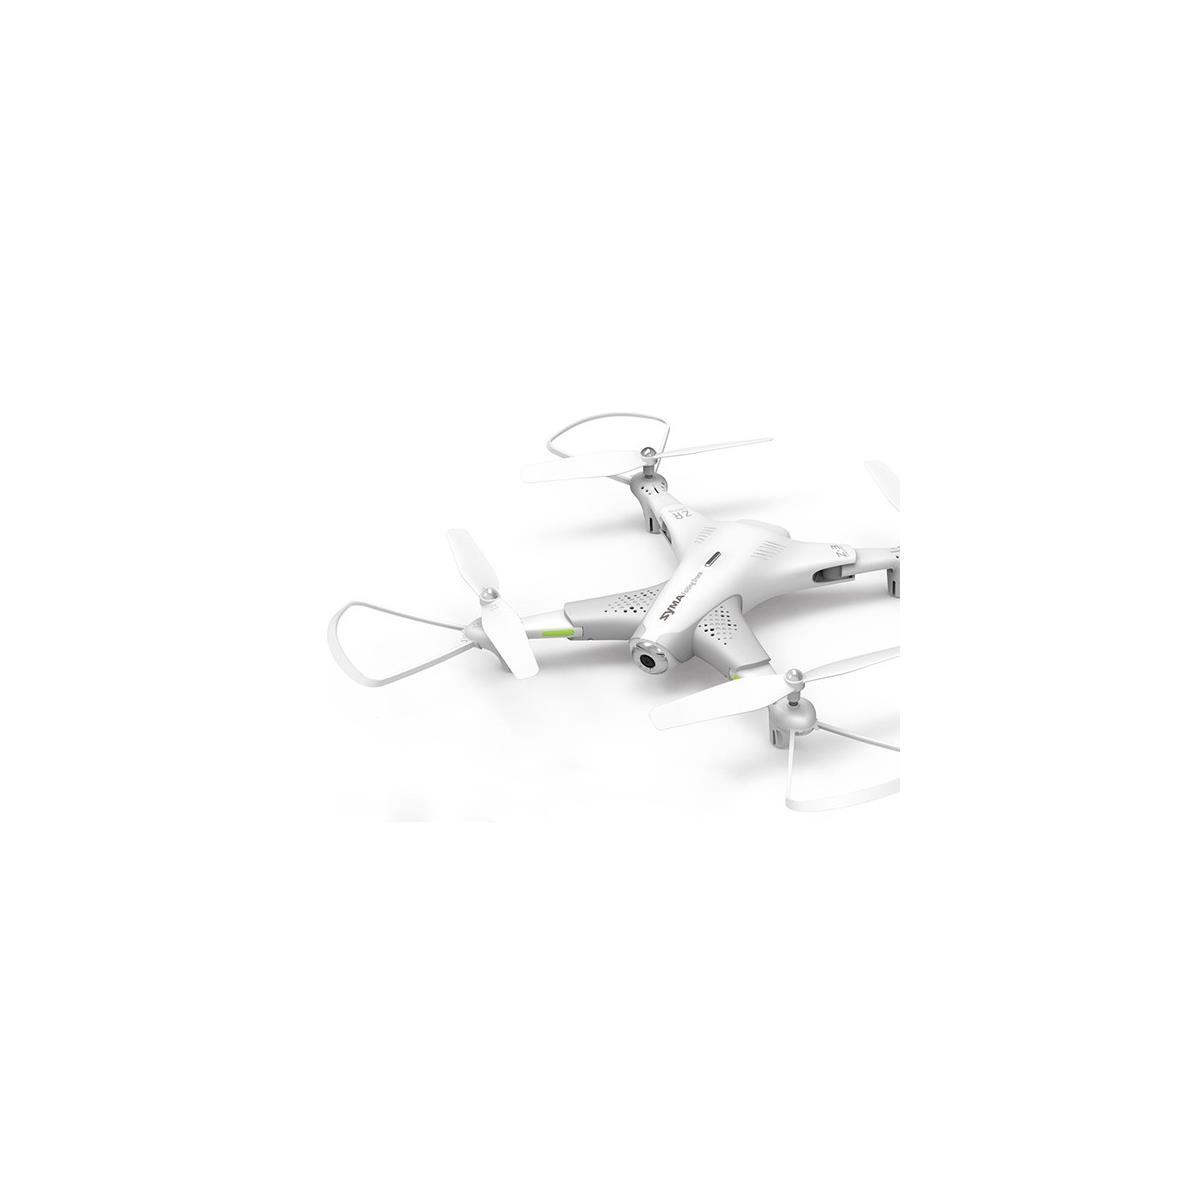 Image of Synco Audio Syma Z3 FPV RC Drone Quadcopter with WiFi Camera and Gravity Control Mode